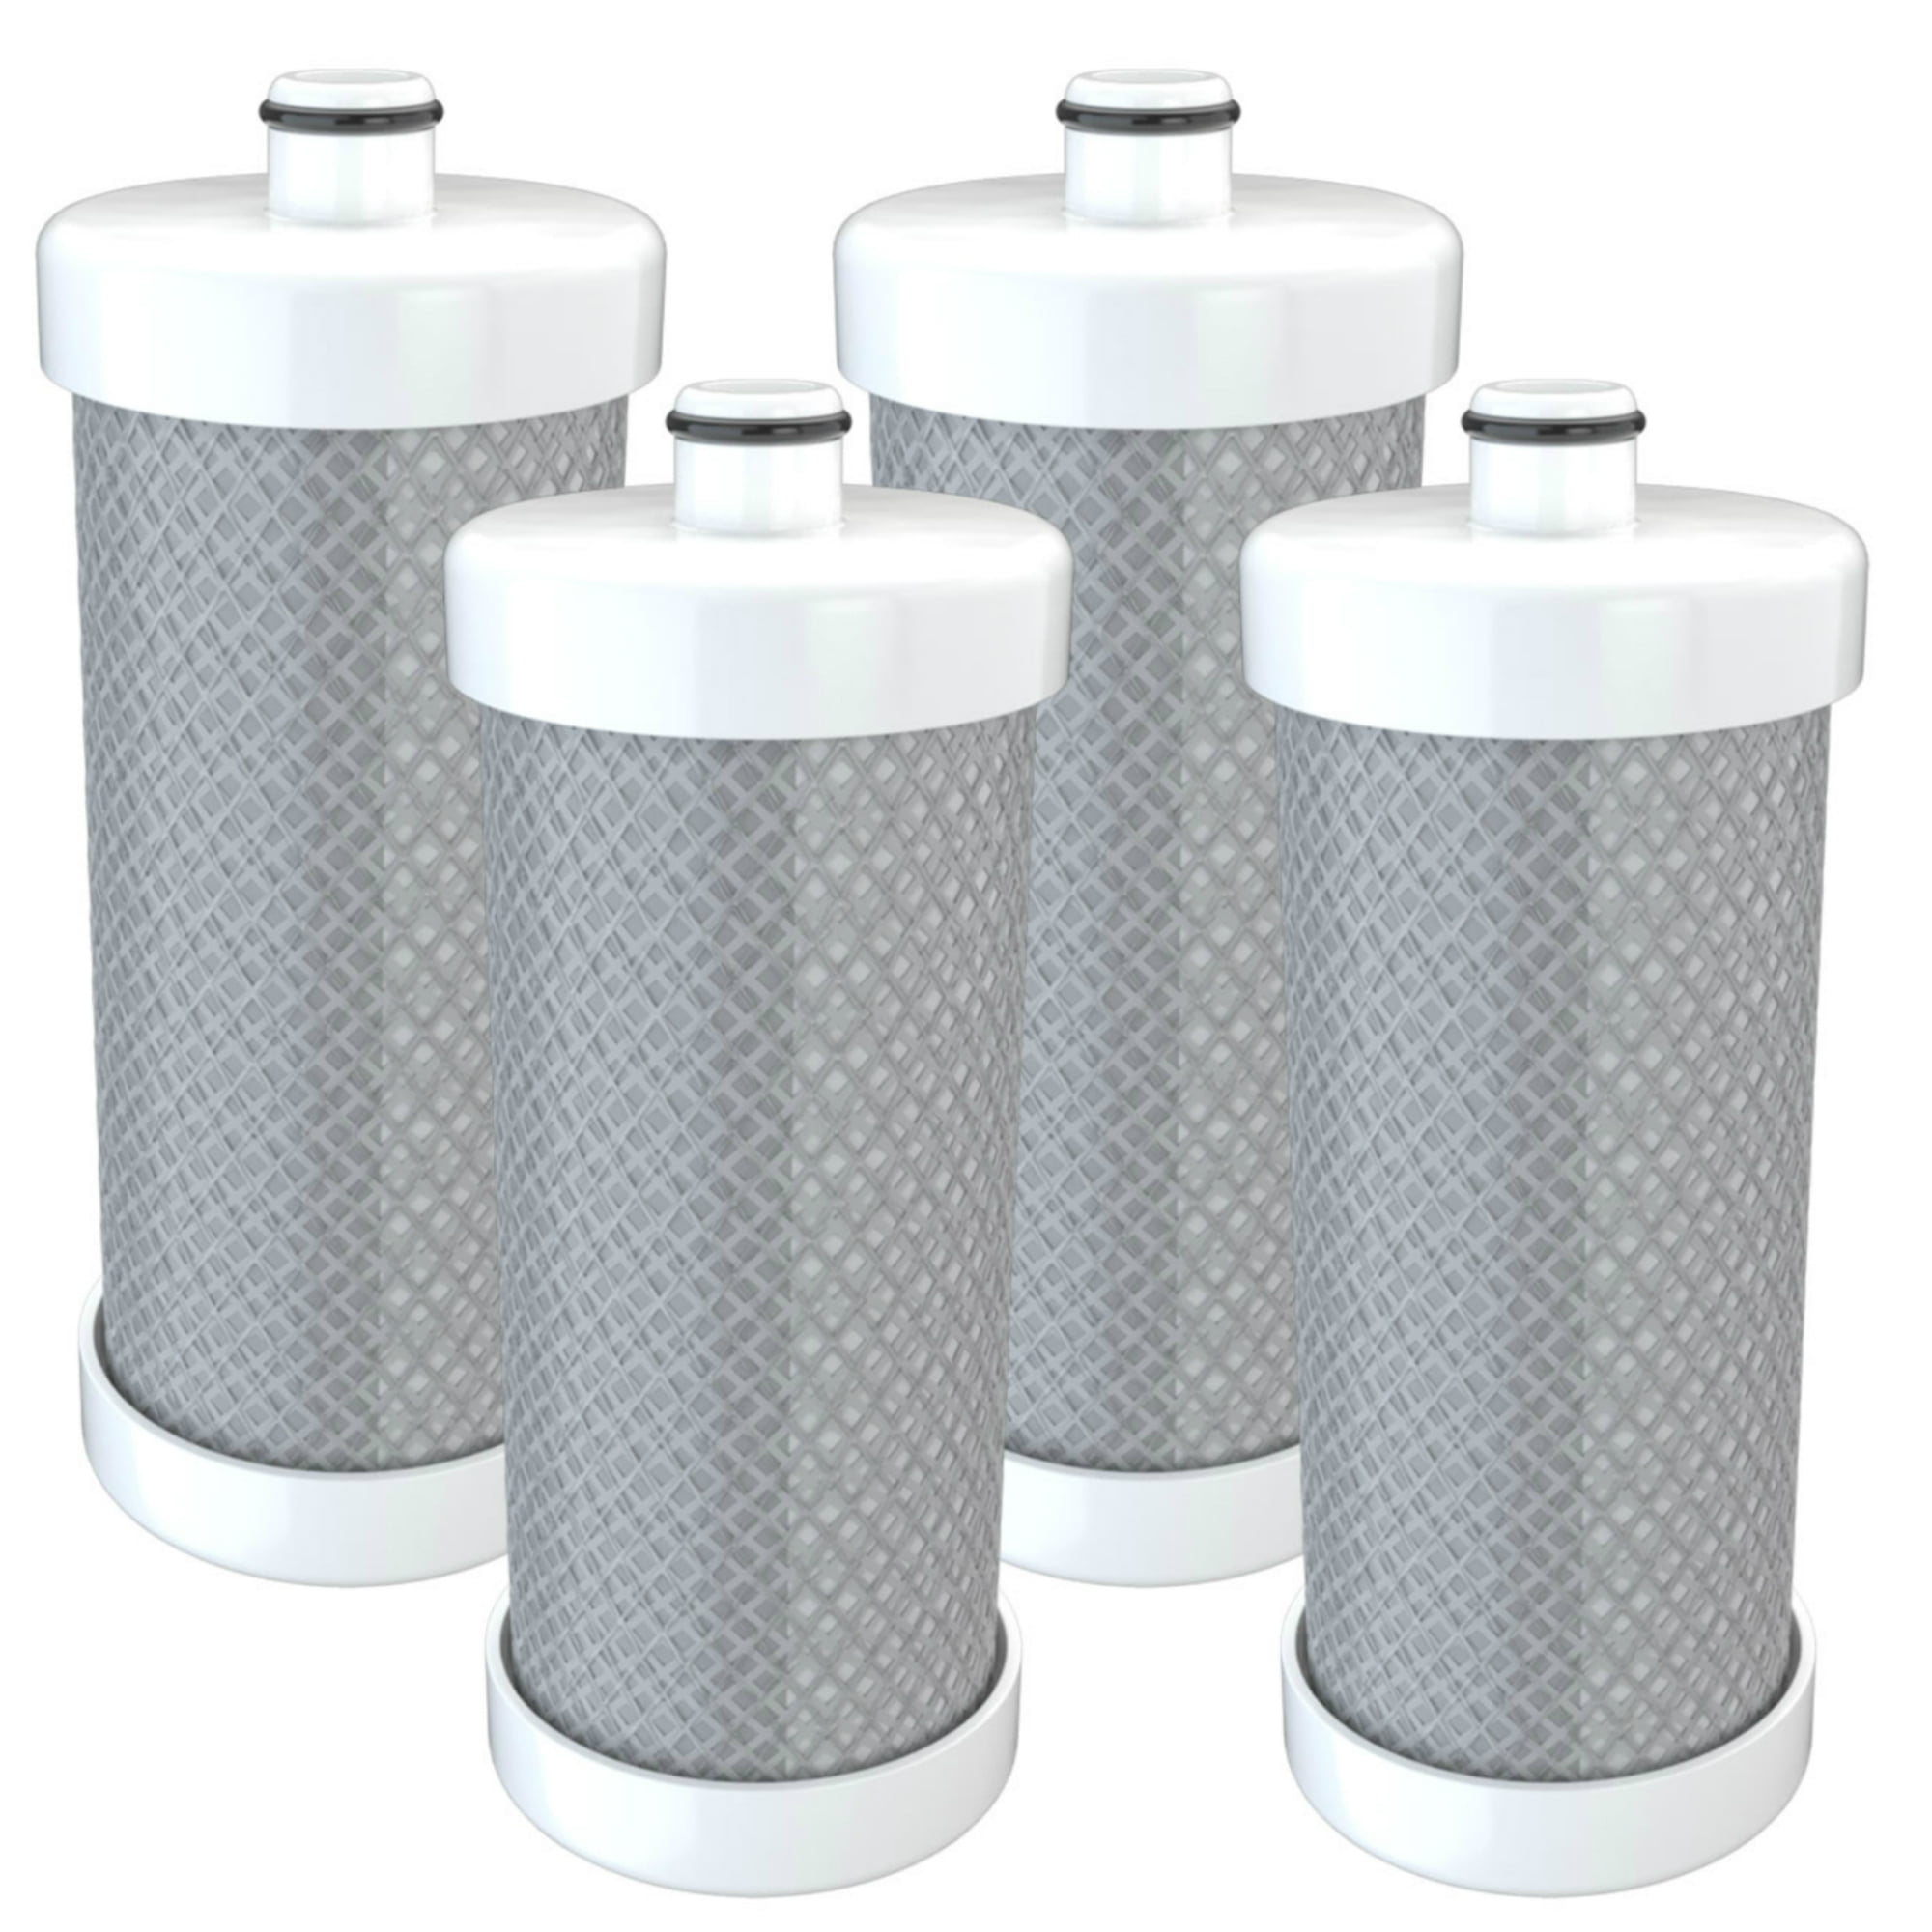 Replacement Water Filter for Frigidaire FRS6HR5HB4 Refrigerators 3 Pack 